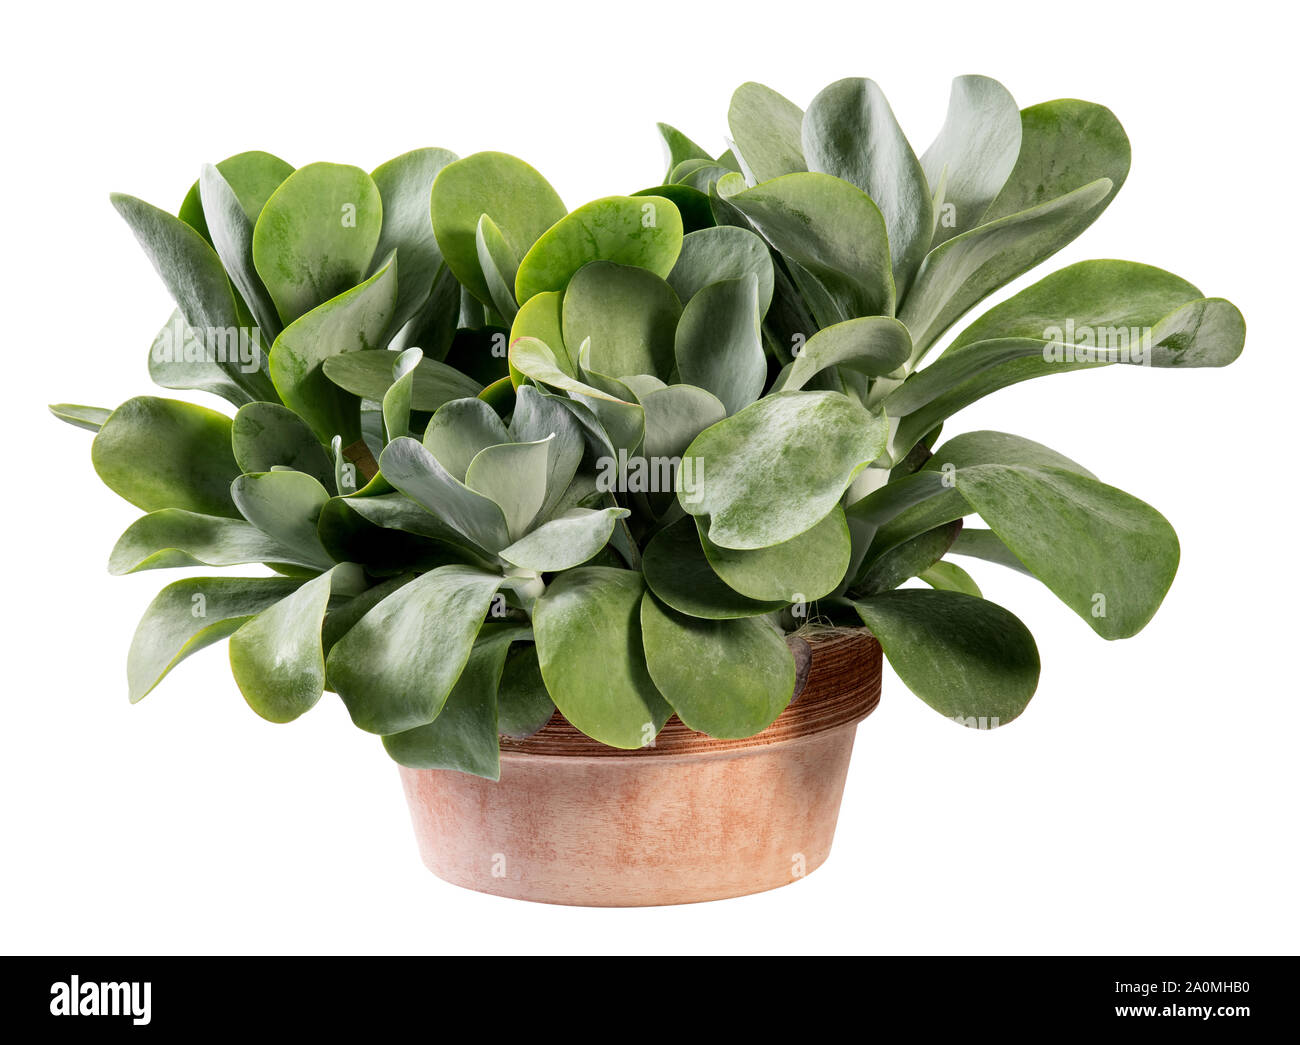 Potted Kalanchoe thyrsiflora plant in terracotta pot, a flowering plant native to Southern Africa isolated on white Stock Photo